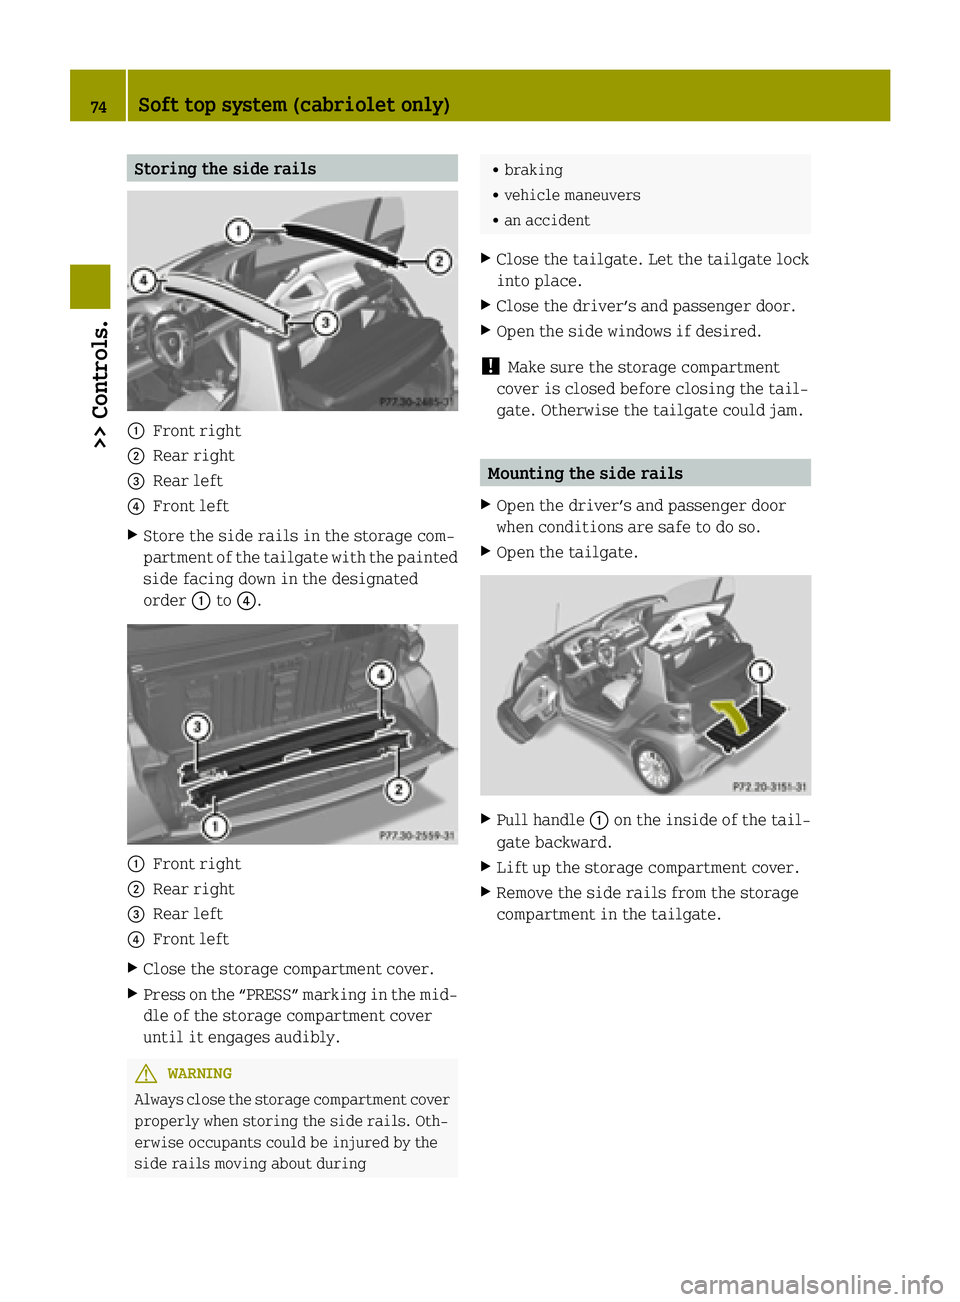 SMART FORTWO COUPE ELECTRIC DRIVE 2015 Manual PDF Storing the side rails
:
Front right
; Rear right
= Rear left
? Front left
X Store the side rails in the storage com-
partment of the tailgate with the painted
side facing down in the designated
order